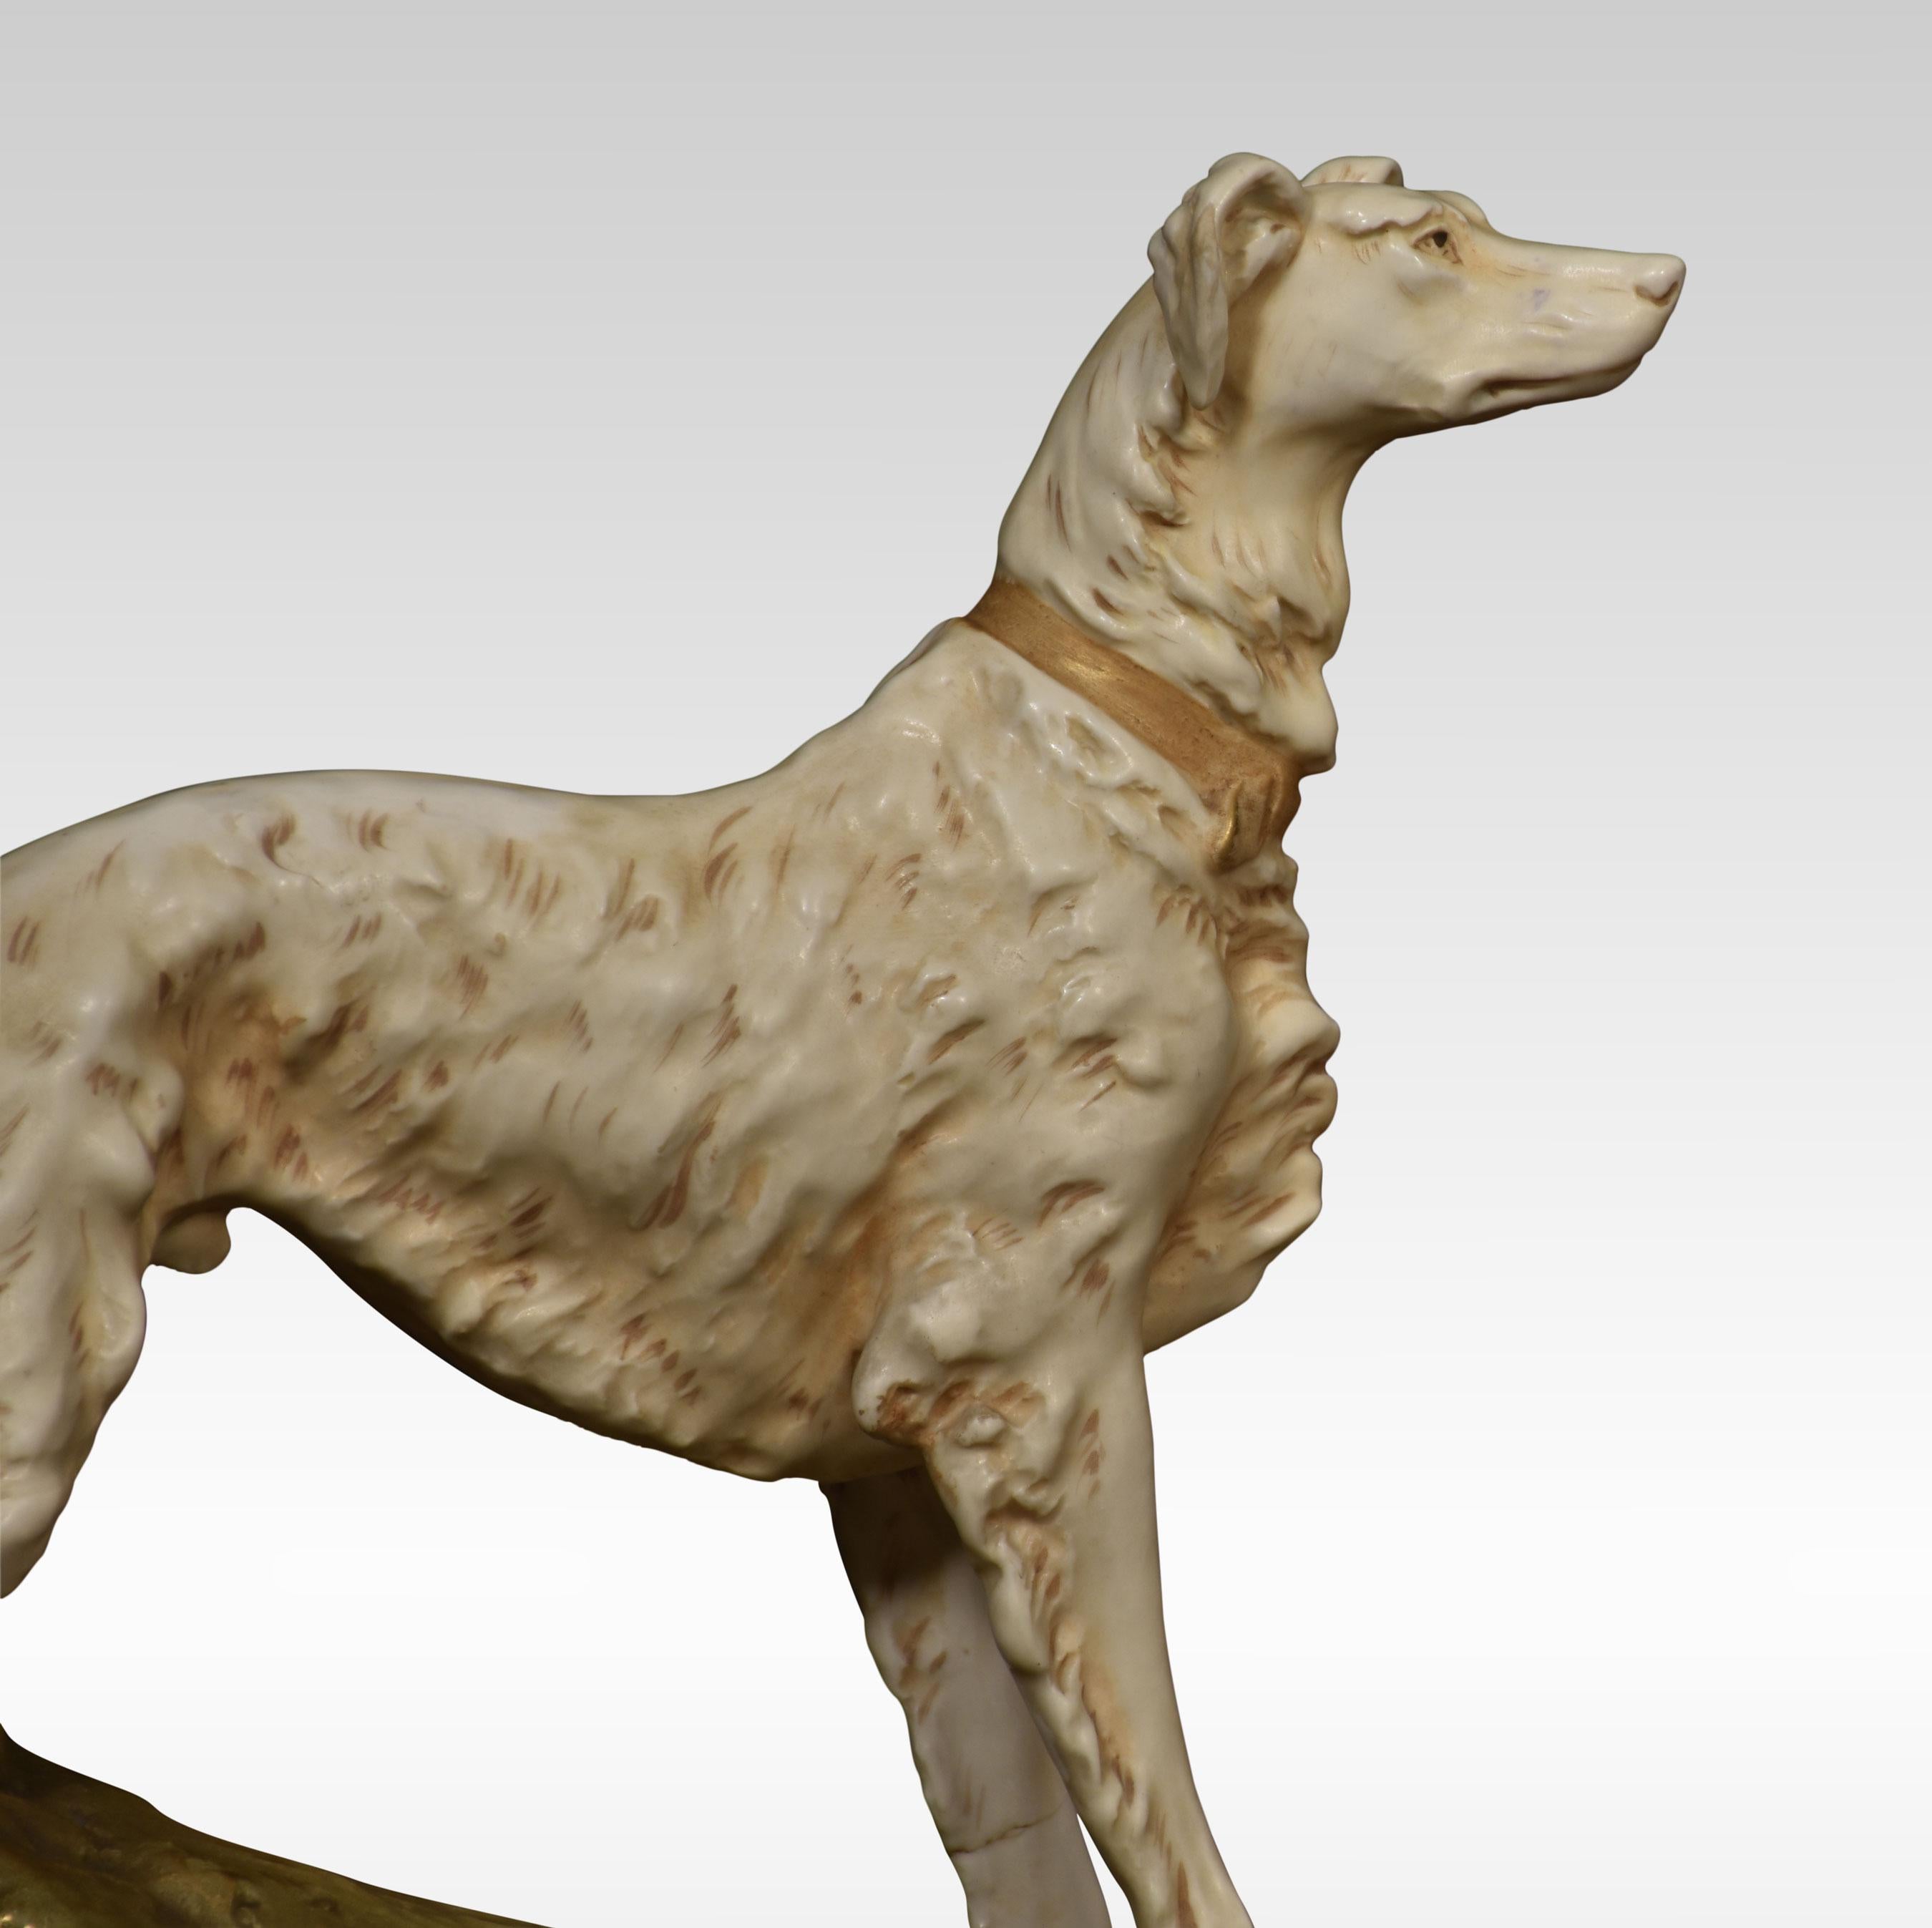 Royal Dux figure of a Borzoi dog, raised on a naturalistic base.
Dimensions
Height 11.5 inches
Width 12.5 inches
Depth 5 inches.